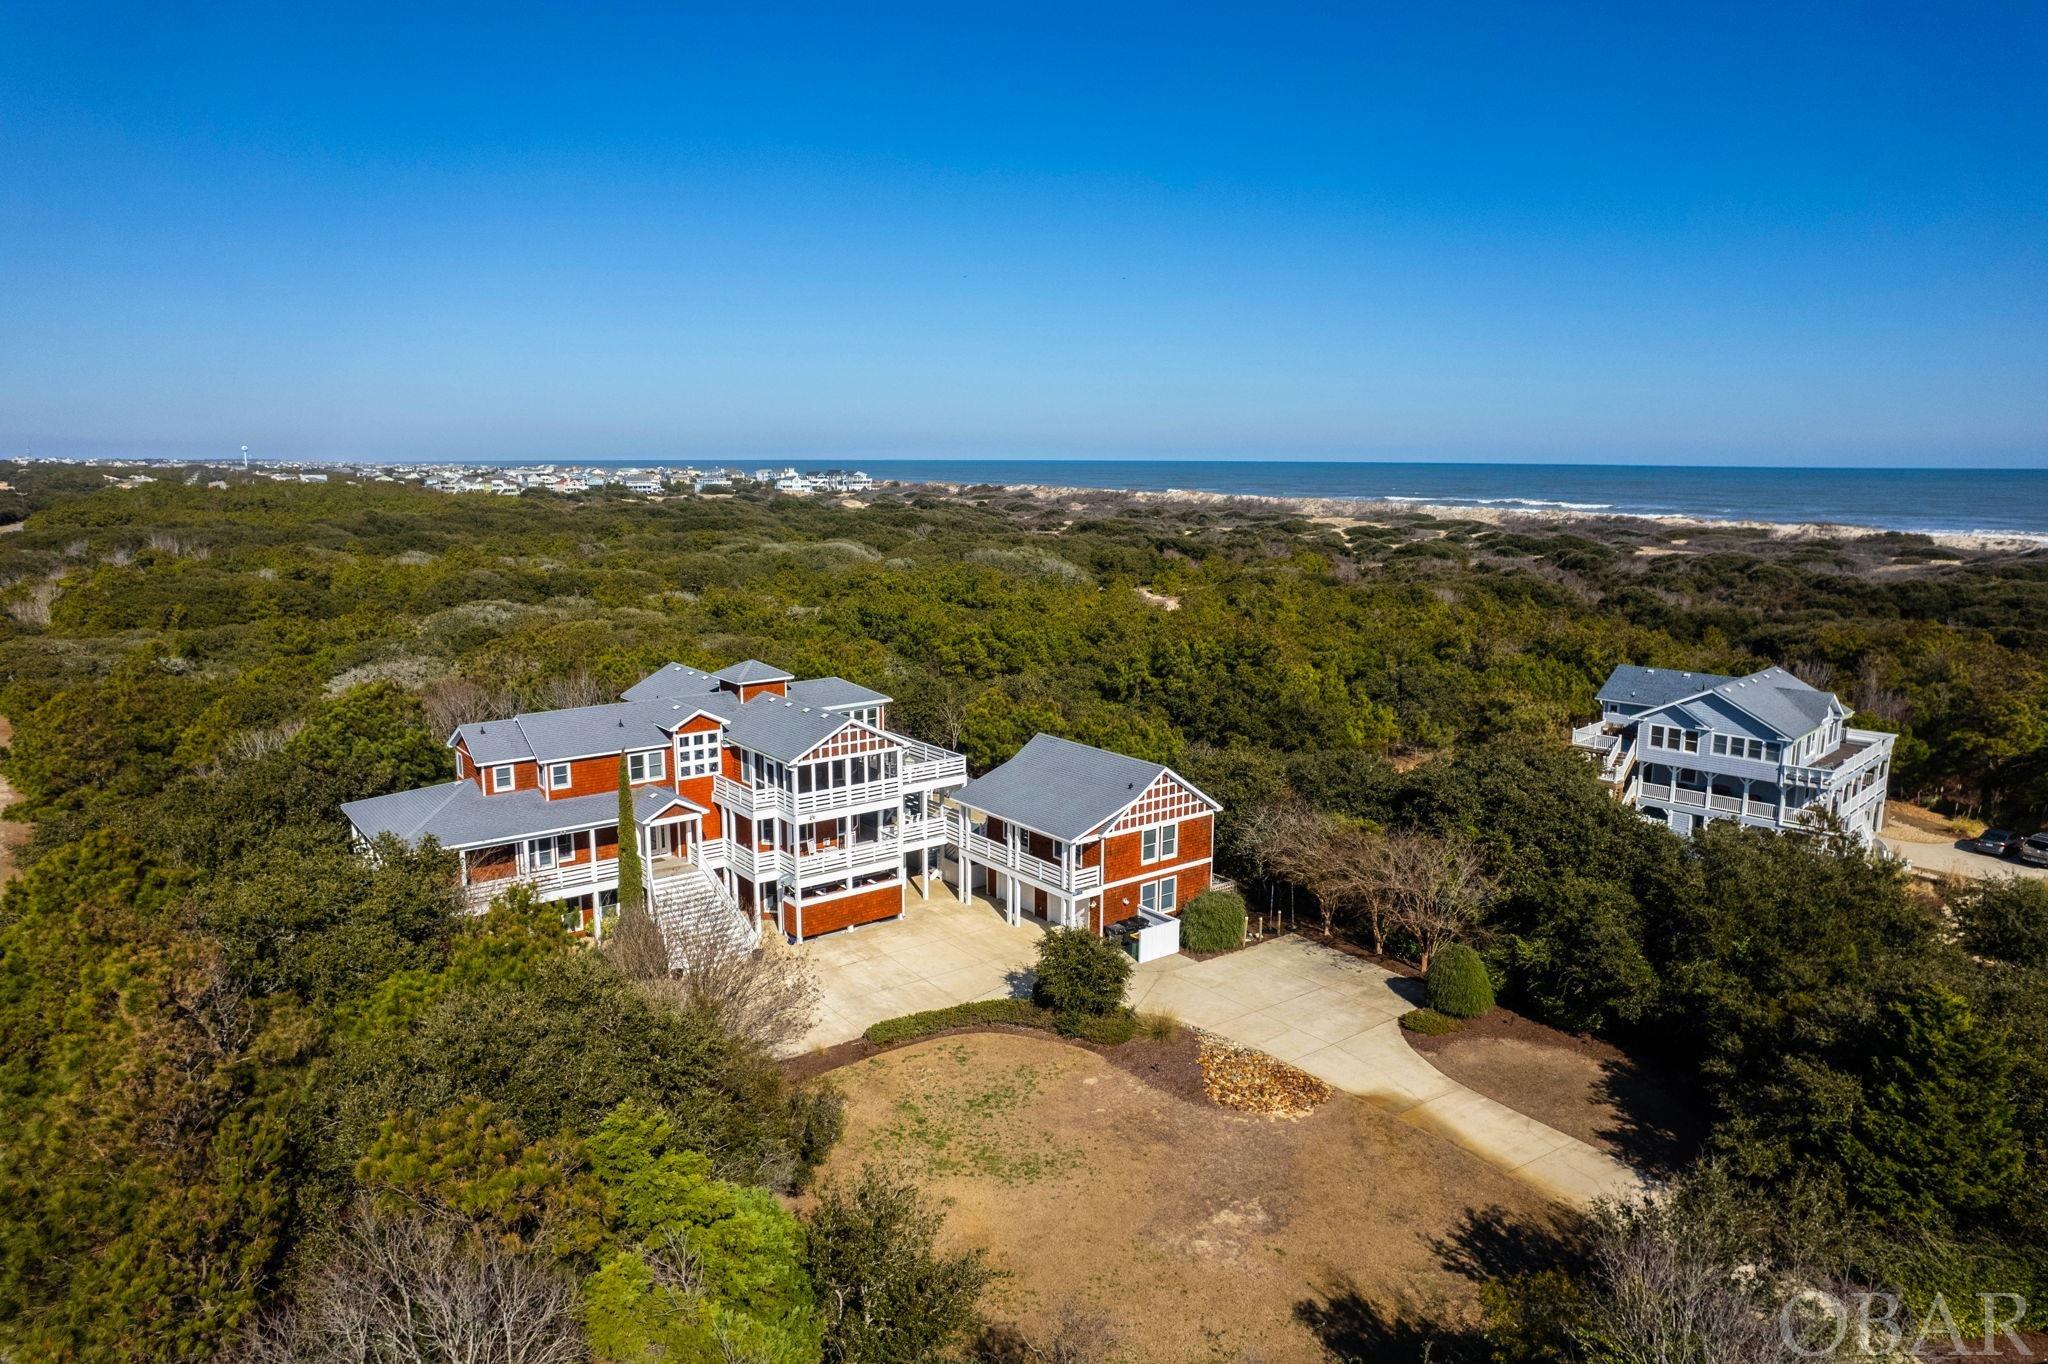 Here is a magnificent opportunity to own an expansive property on almost a full acre on the Outer Banks.  It is complete with an incredible Ocean View, which ultimately takes over the horizon overlooking the Atlantic Ocean.  483 Spindrift Trail is genuinely a custom-built home with an extreme eye for detail.  Built with remarkable material selection and craftsmanship throughout the property, nothing is left to be desired.  Expansive decking throughout the property adjoins all areas of the property together seamlessly.  The Double Bay garage is a luxury in the Corolla market with plenty of utility for personal or investment use, whether creating a gaming area or a self-contained gym for vacationers looking to keep "putting in the work". The finished suite above is entirely separate from the main home for peace of mind during the busy summer months and creates a little getaway on the property itself.  While you're getting away, remember the open pool entertainment area, which is only steps away.  A large Cabana sits and invites you to socialize in the shade; it's created in the hot summer sun by the grill, tiki bar, or hot tub.  When inside, this luxurious property awaits an open and spacious kitchen with stainless steel appliances, outfitted complete with a Sub-zero Refrigerator/Freezer and a 6-star burner Viking range.  Custom cabinets, double sinks, and plenty of countertop space for multiple chefs to operate in.  While two chefs are working their magic in the kitchen, the open living area with beautiful hardwood floors gives everyone plenty of room to engage in conversations about their day on the beach located only a short walk from the property.  There is so much to explain in so few words that 483 Spindrift Trail is a property you must see in person to appreciate its grandeur and still feel surrounded by the comfort of home.